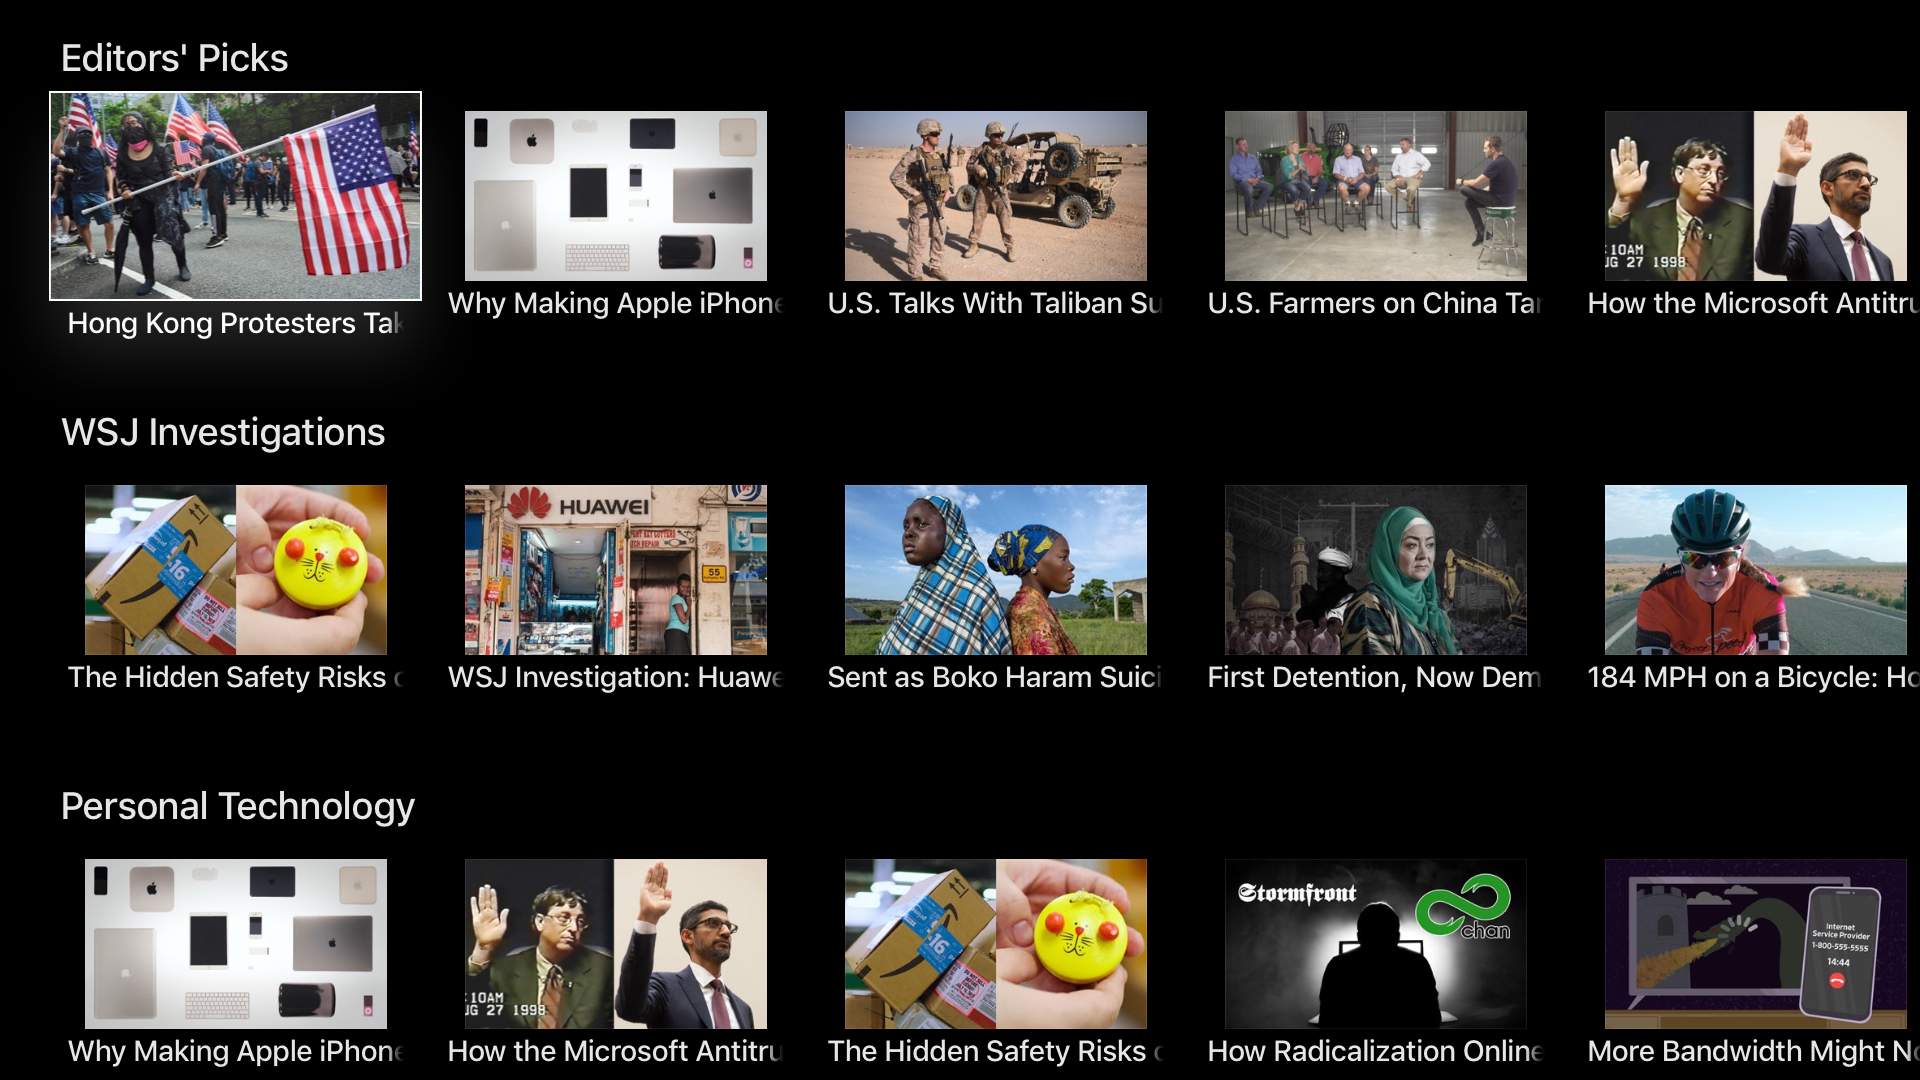 The Wall Street Journal Apple TV home screen before the update - a boring uniform grid of video thumbnails.